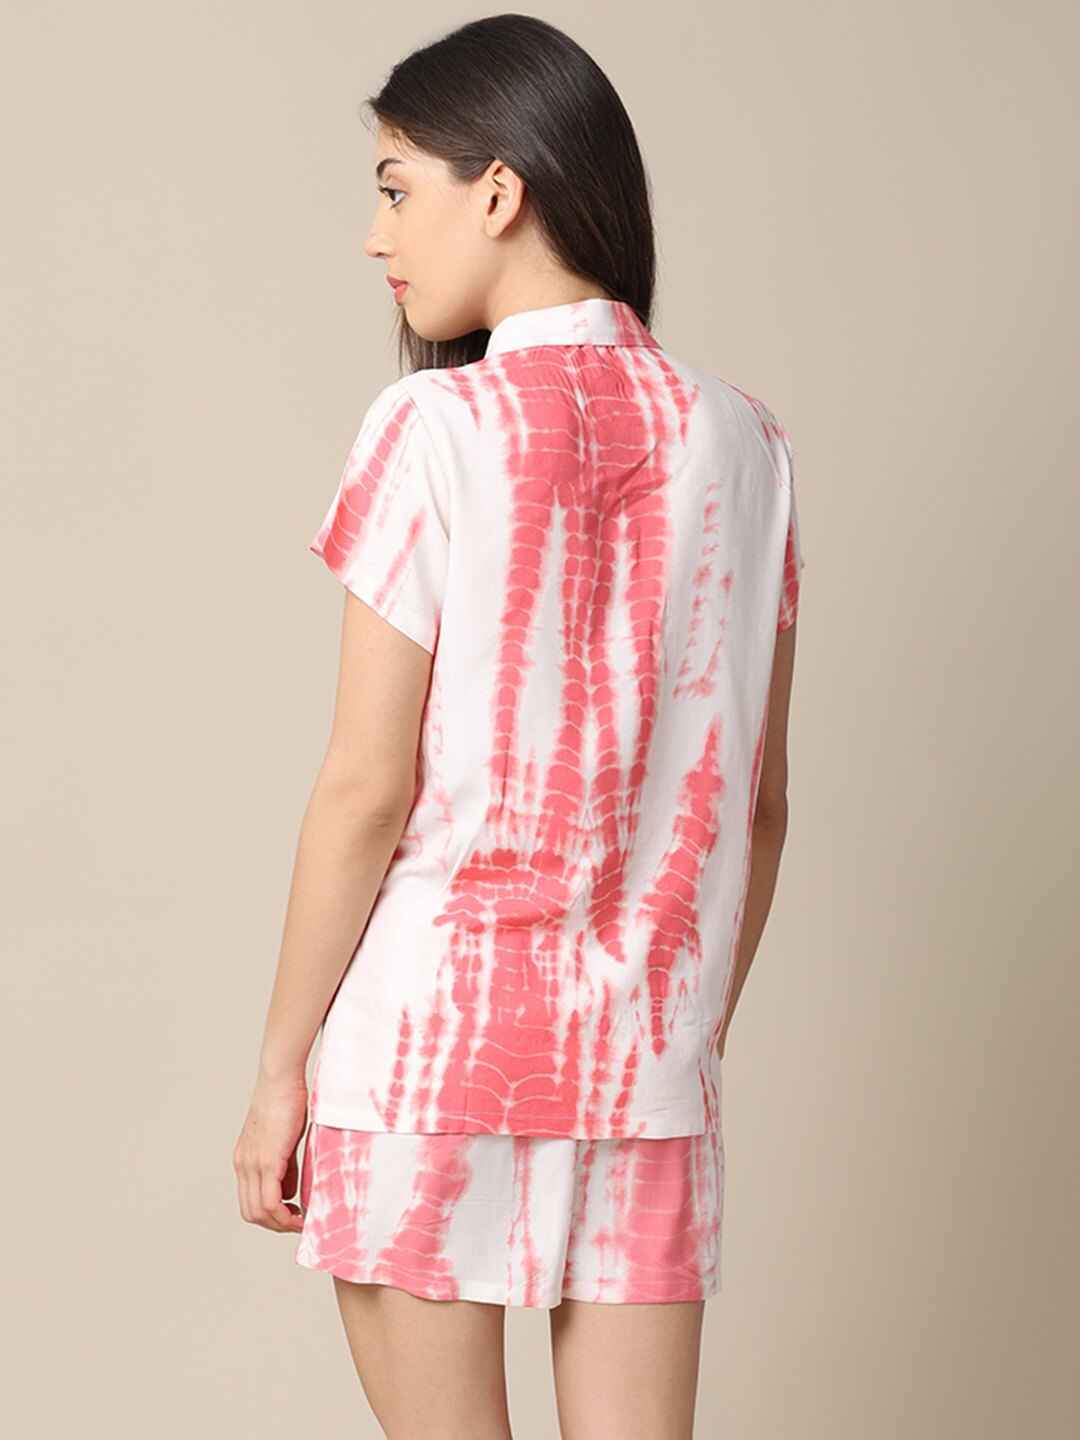 Pink Color Tie and Dye Printed Cotton Shorts Set Claura Designs Pvt. Ltd. Lounge Short Cotton, Nightsuit, Pink, Printed